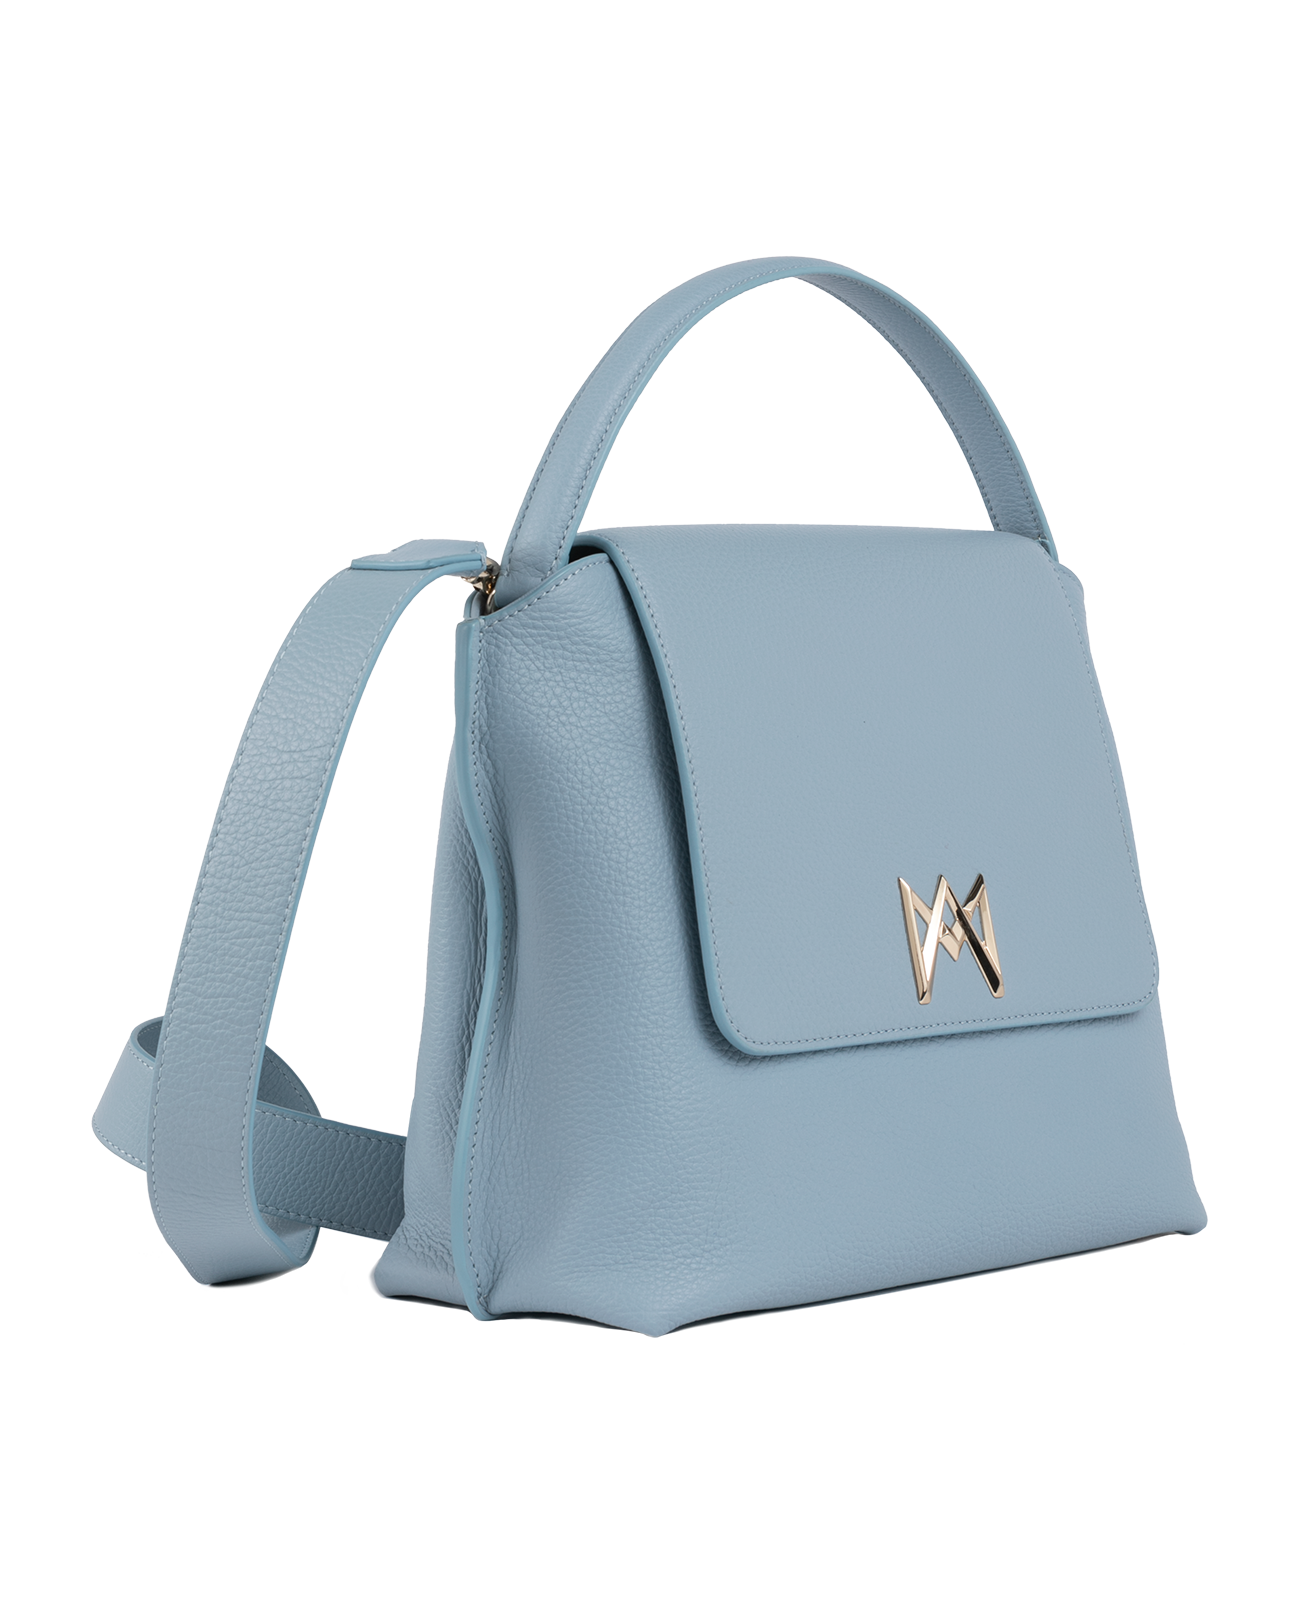 Cross-body bag in Italian full-grain leather, semi-aniline calf Italian leather with detachable shoulder strap.Three compartments, zip pocket in the back compartment. Magnetic flap closure with logo. Color: Baby Blue. Size:Large